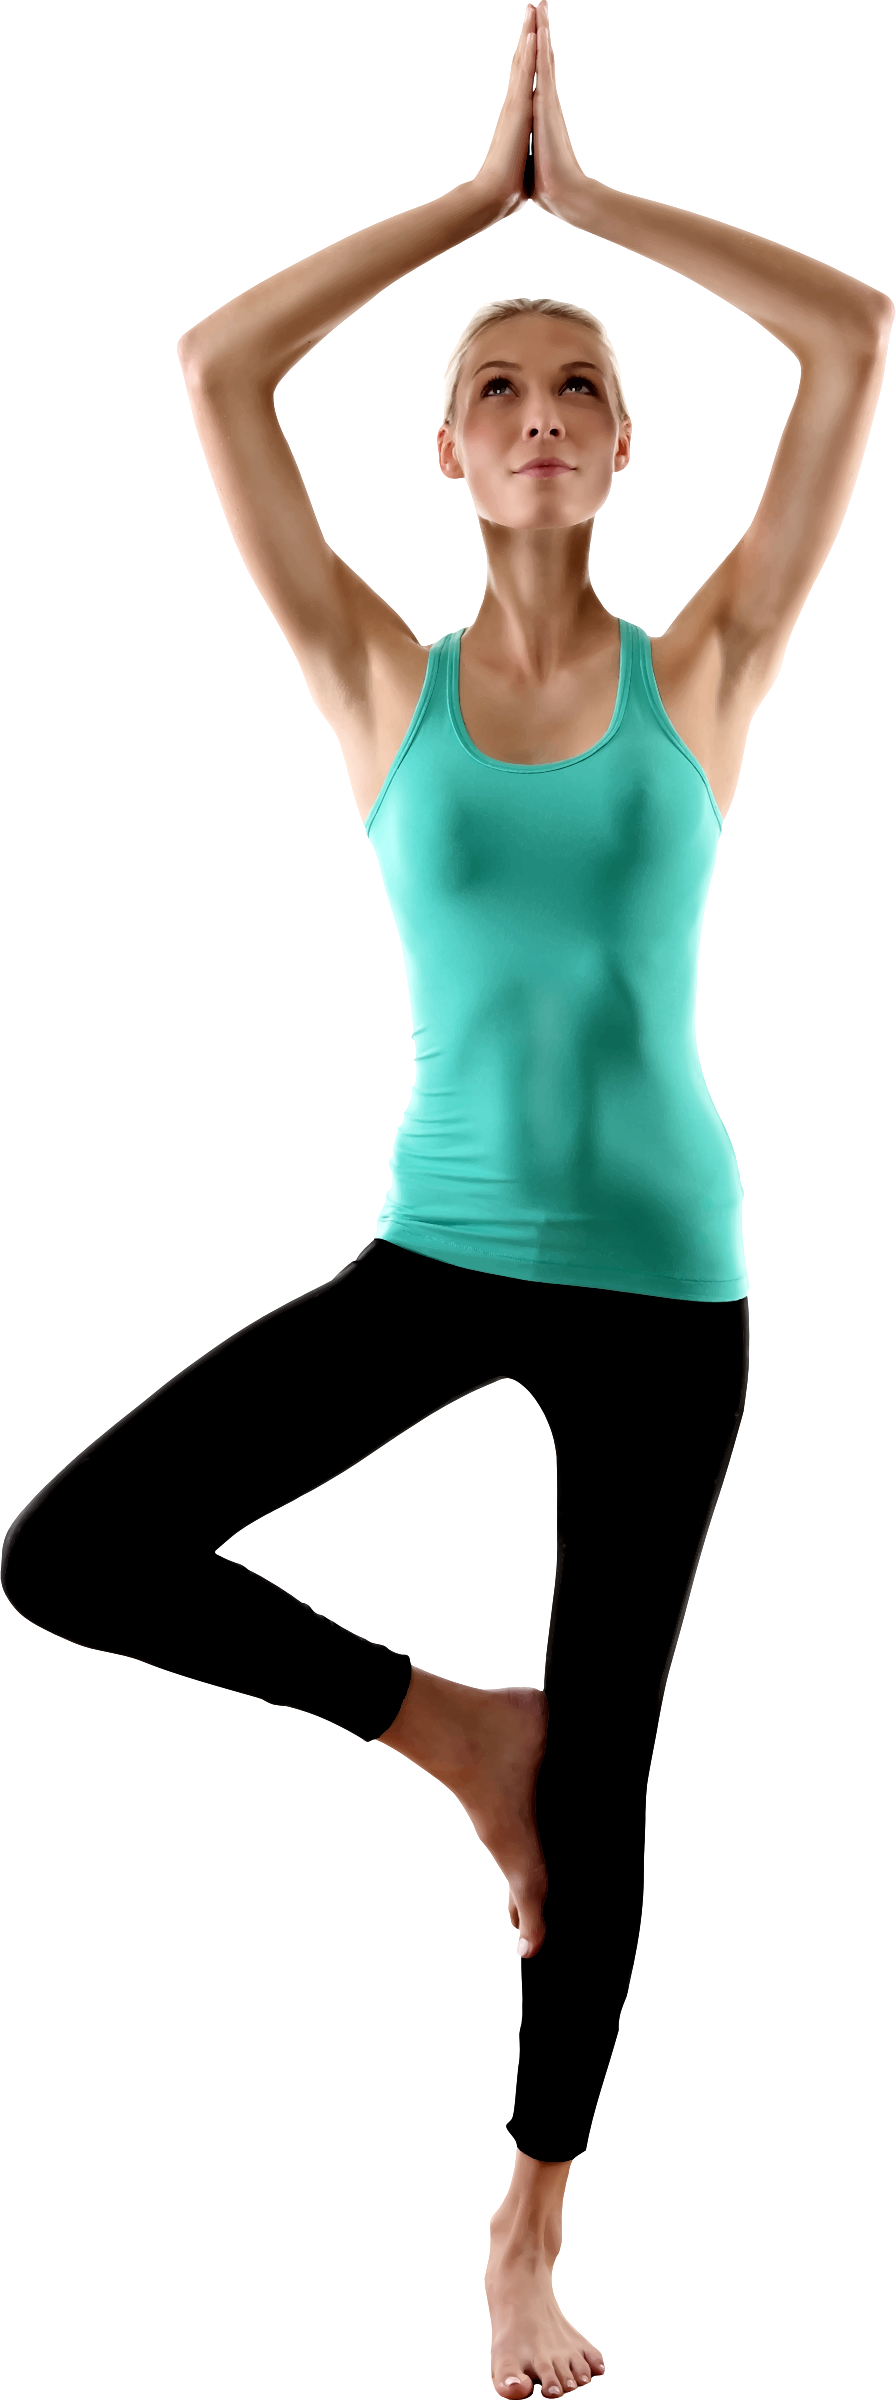 Download Woman in Yoga Pose Vector Clipart image - Free stock photo ...